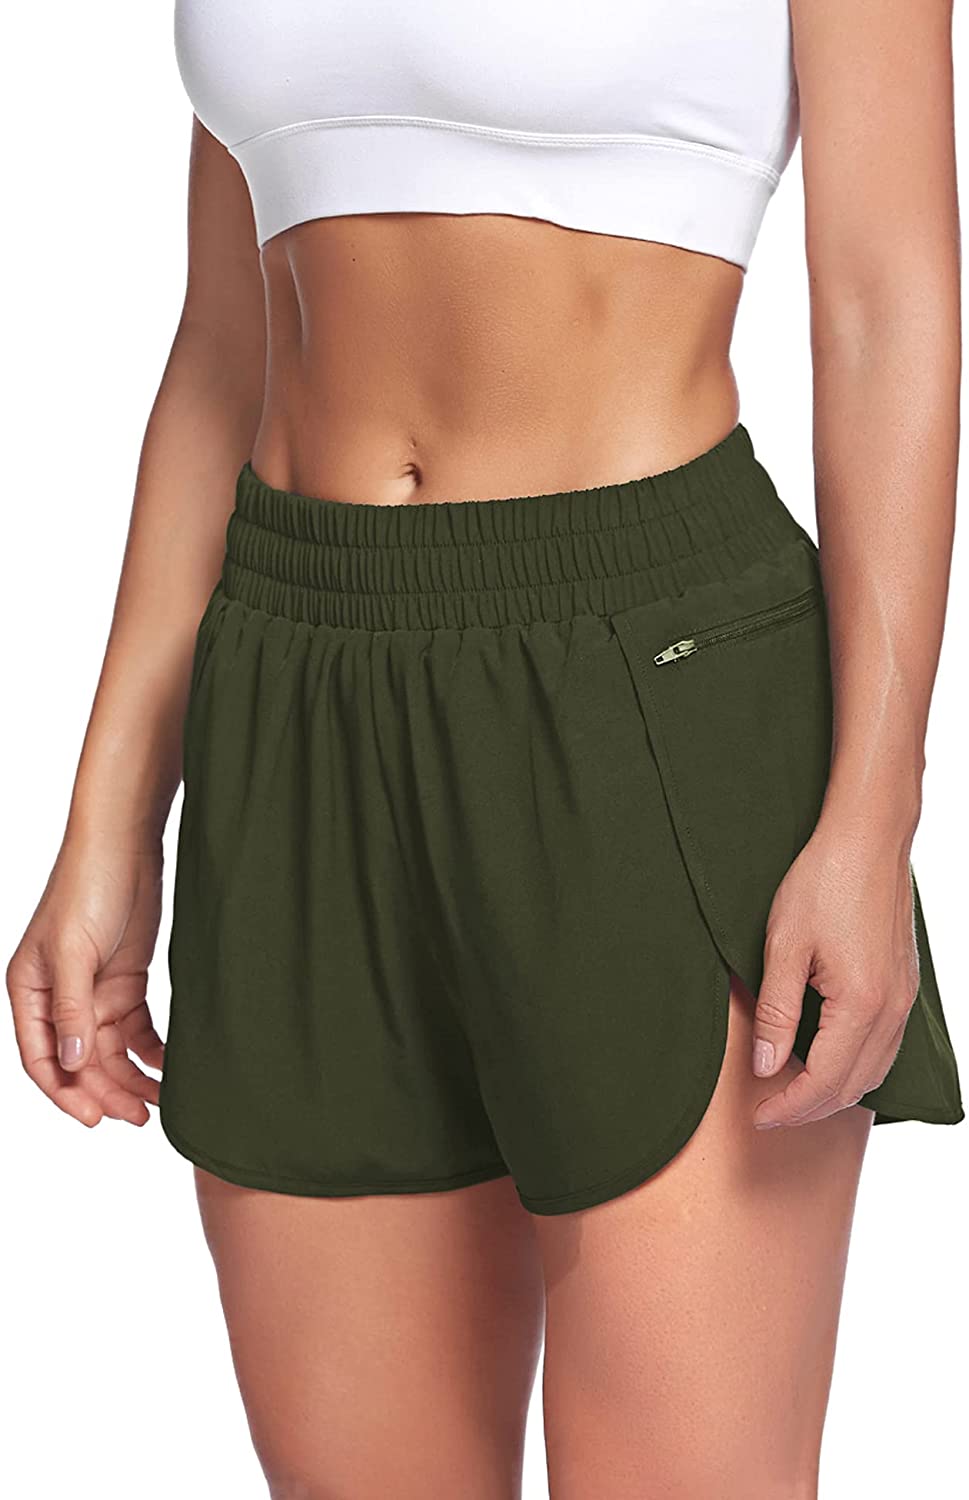 LaLaLa Womens Workout Shorts with Zip Pocket Quick-Dry Athletic